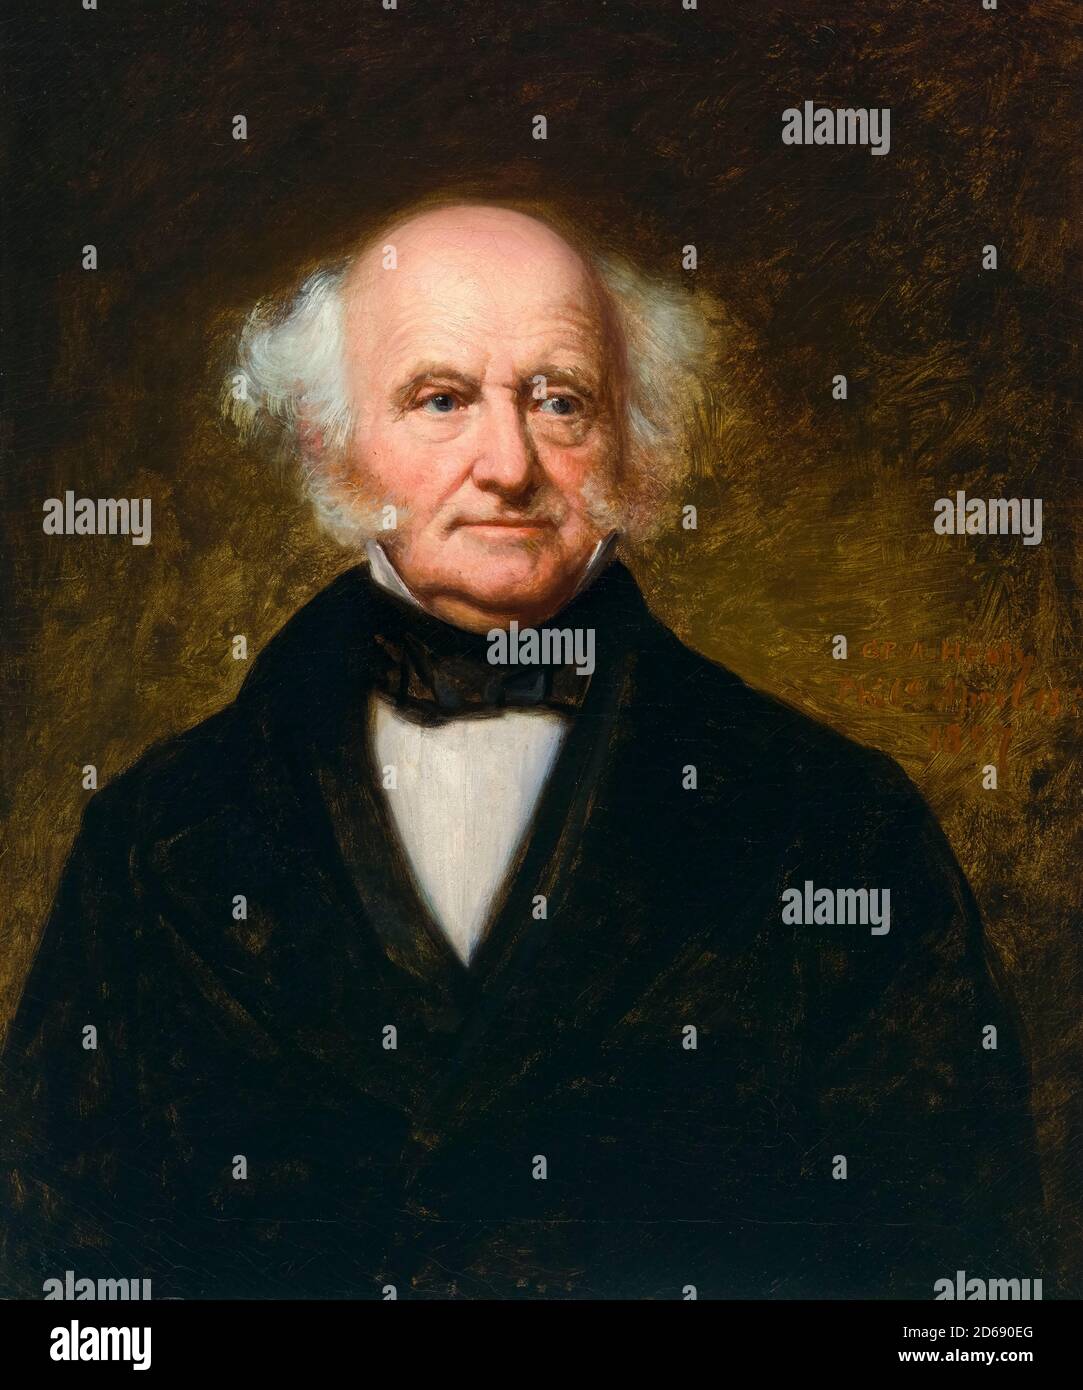 Martin Van Buren (1782-1862), American statesman who served as the eighth President of the United States, portrait painting by George Peter Alexander Healy, 1857 Stock Photo